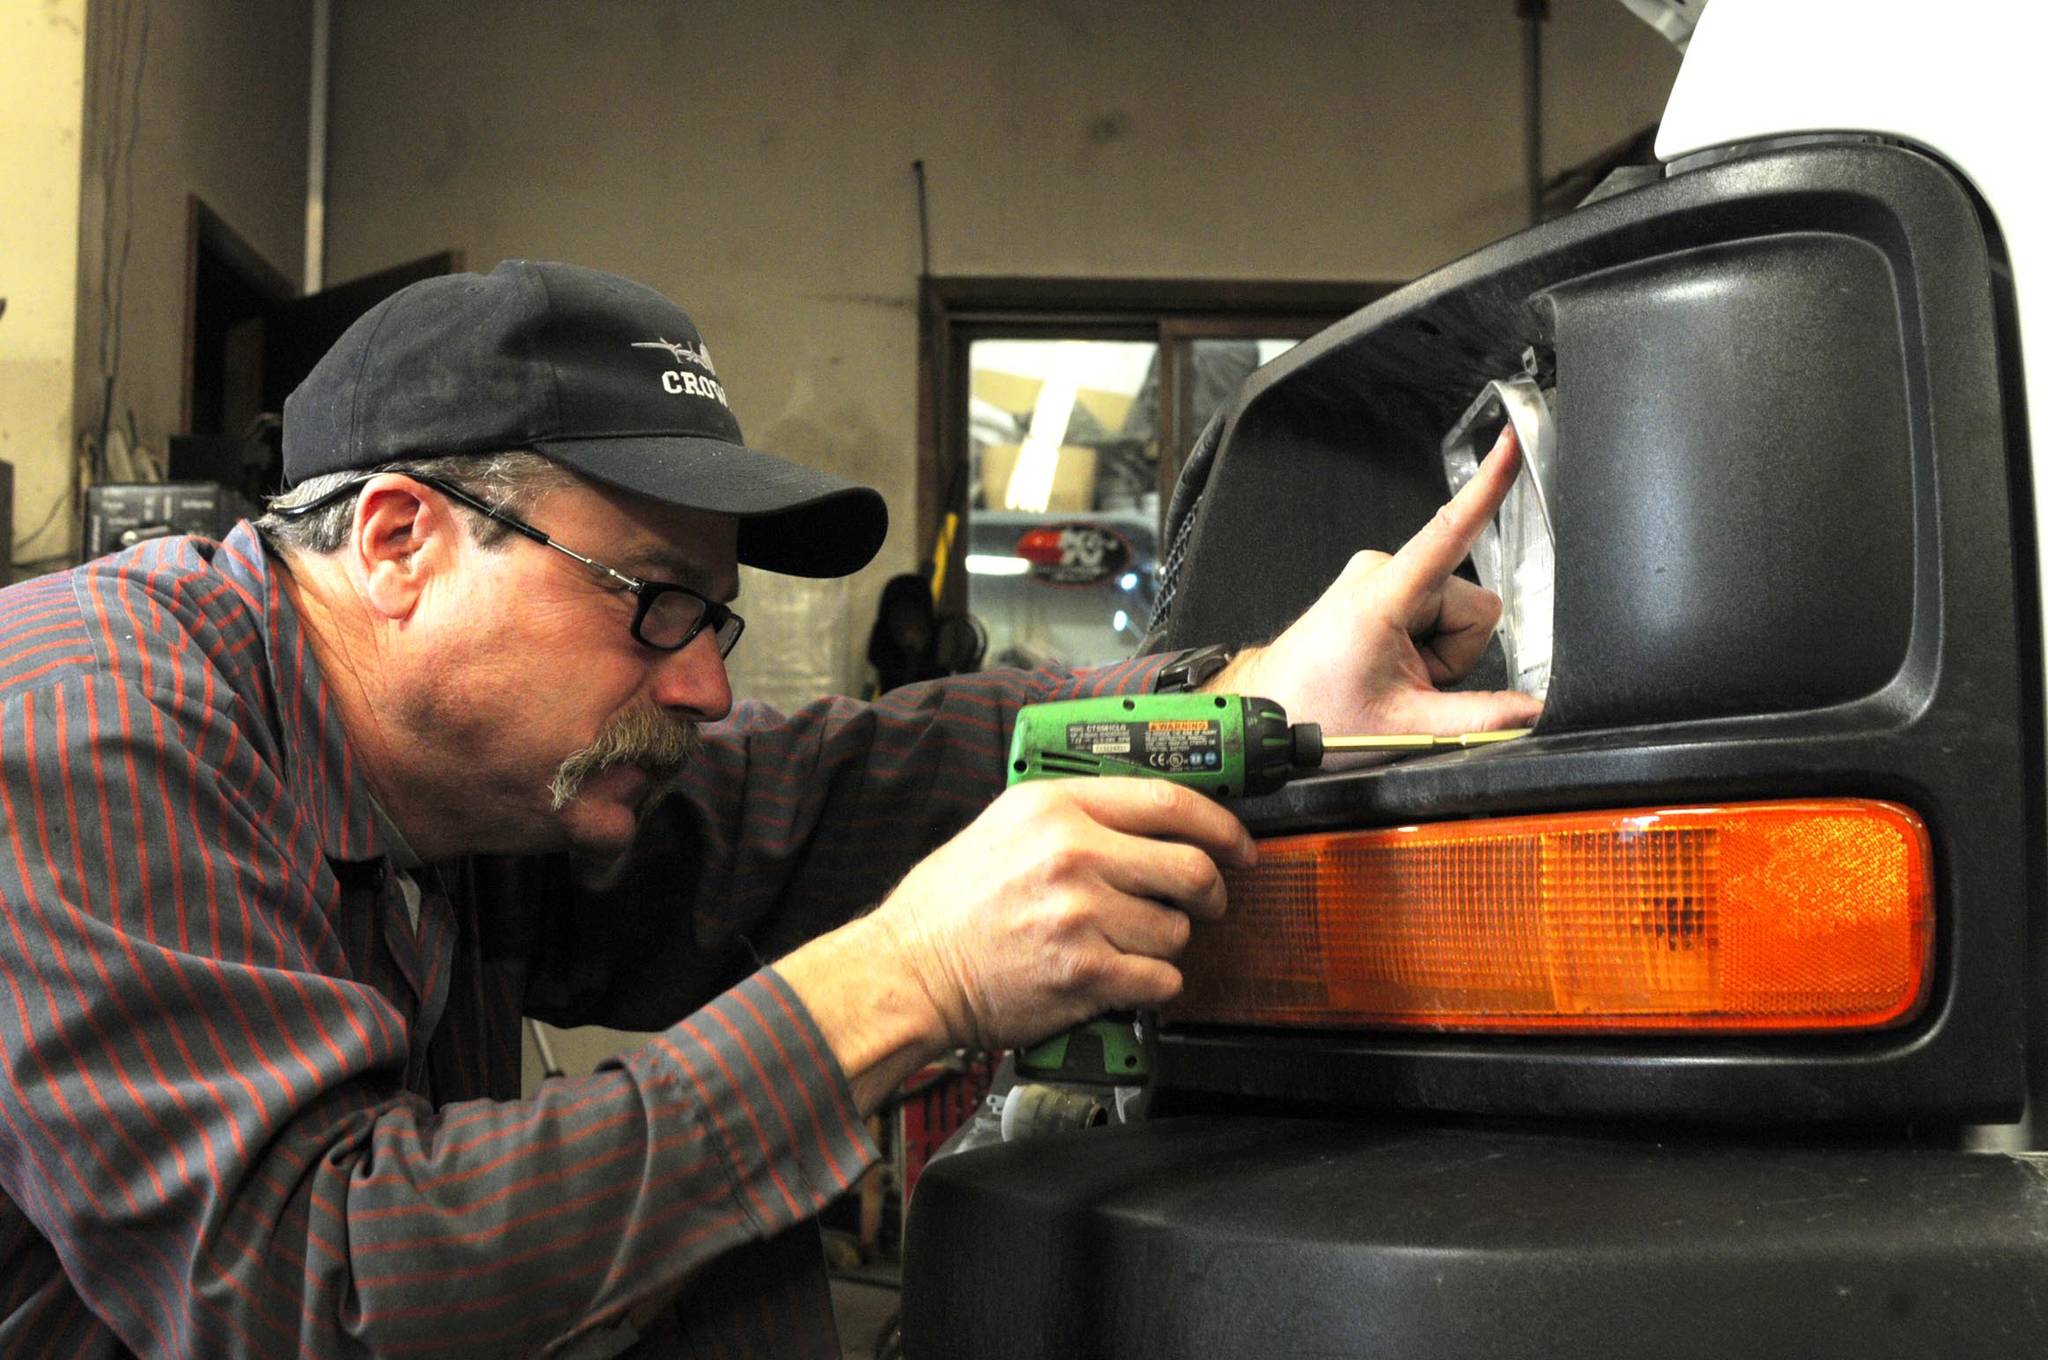 Gary Dawkins, owner of Gary’s Auto Electric, removes an old headlight from a customer’s van Monday, Dec. 11, 2017 at his shop near Soldotna, Alaska. After more than 30 years in the business, Dawkins will close Gary’s Auto Electric on Friday with one additional clearout opening scheduled for Jan. 15. (Photo by Elizabeth Earl/Peninsula Clarion)